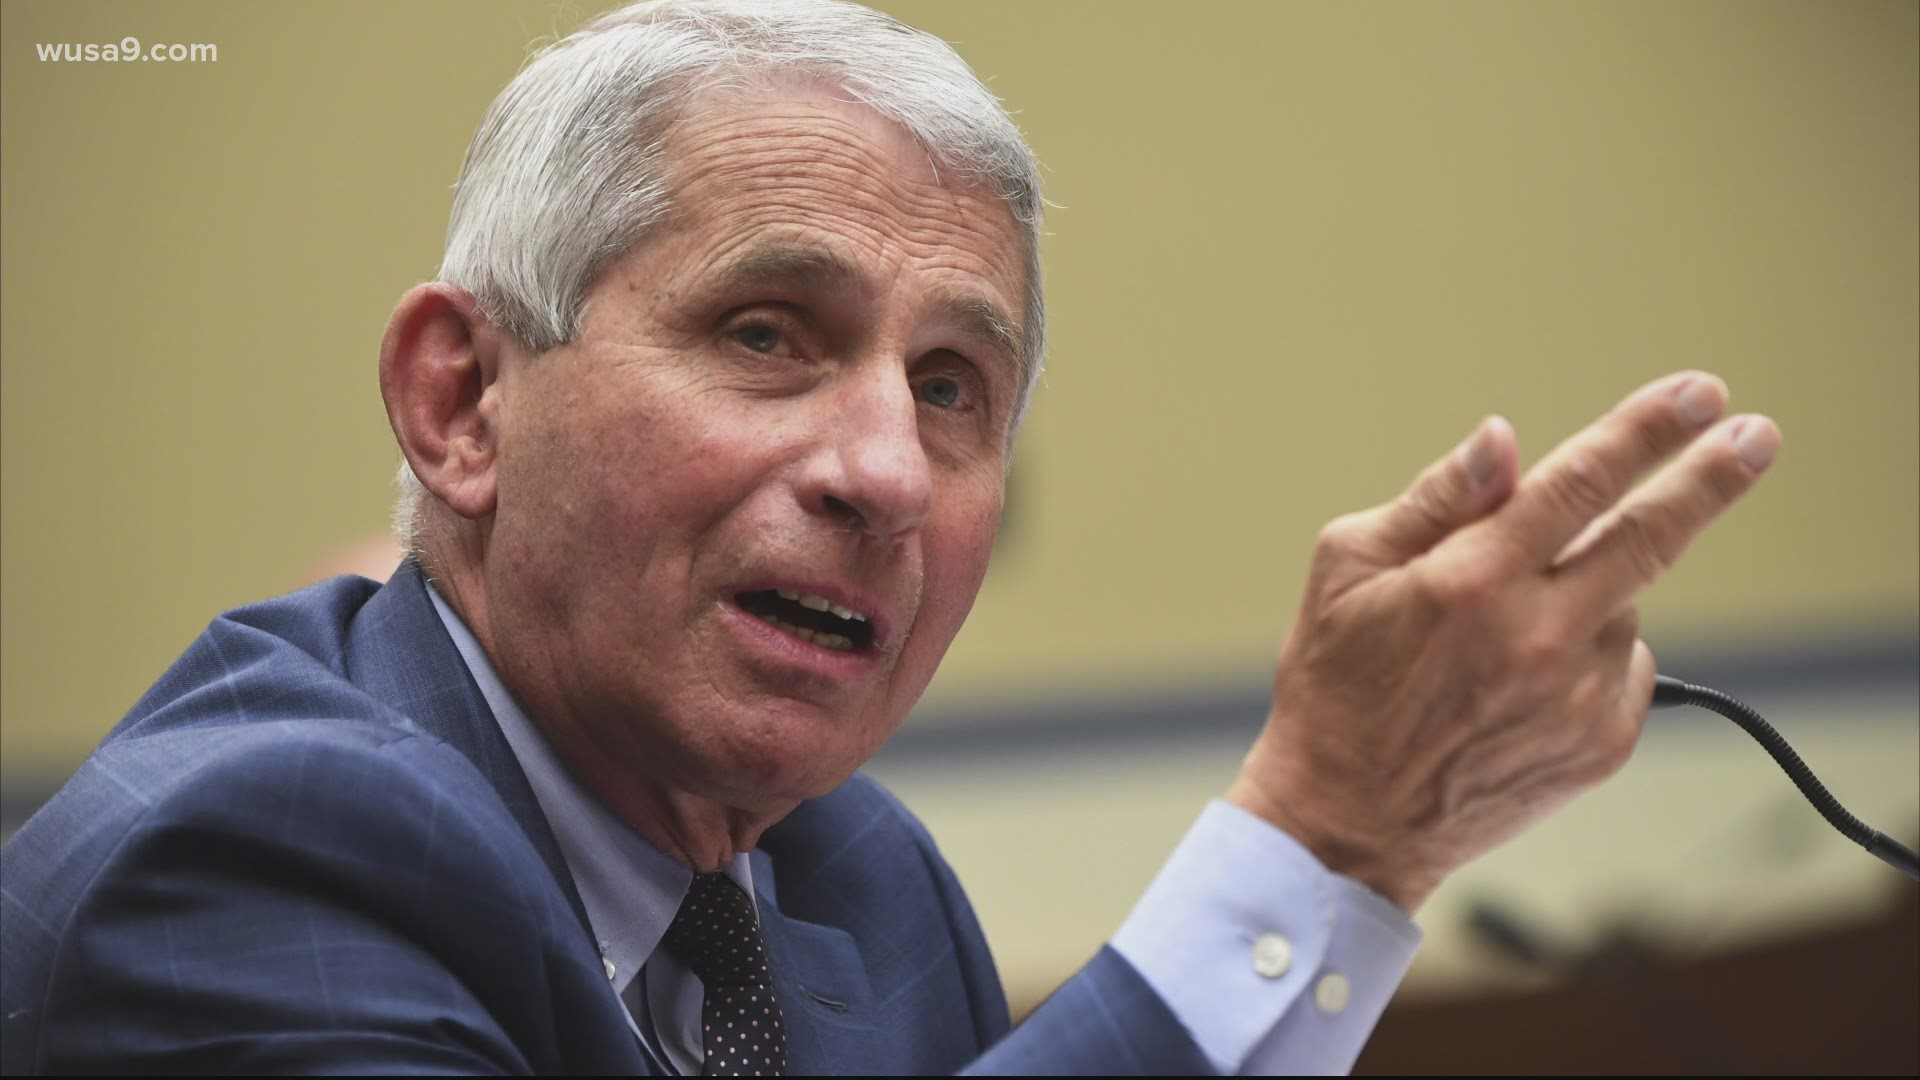 In a video recorded Tuesday, Montgomery County resident Dr. Anthony Fauci said the battle against COVID-19 is not over.